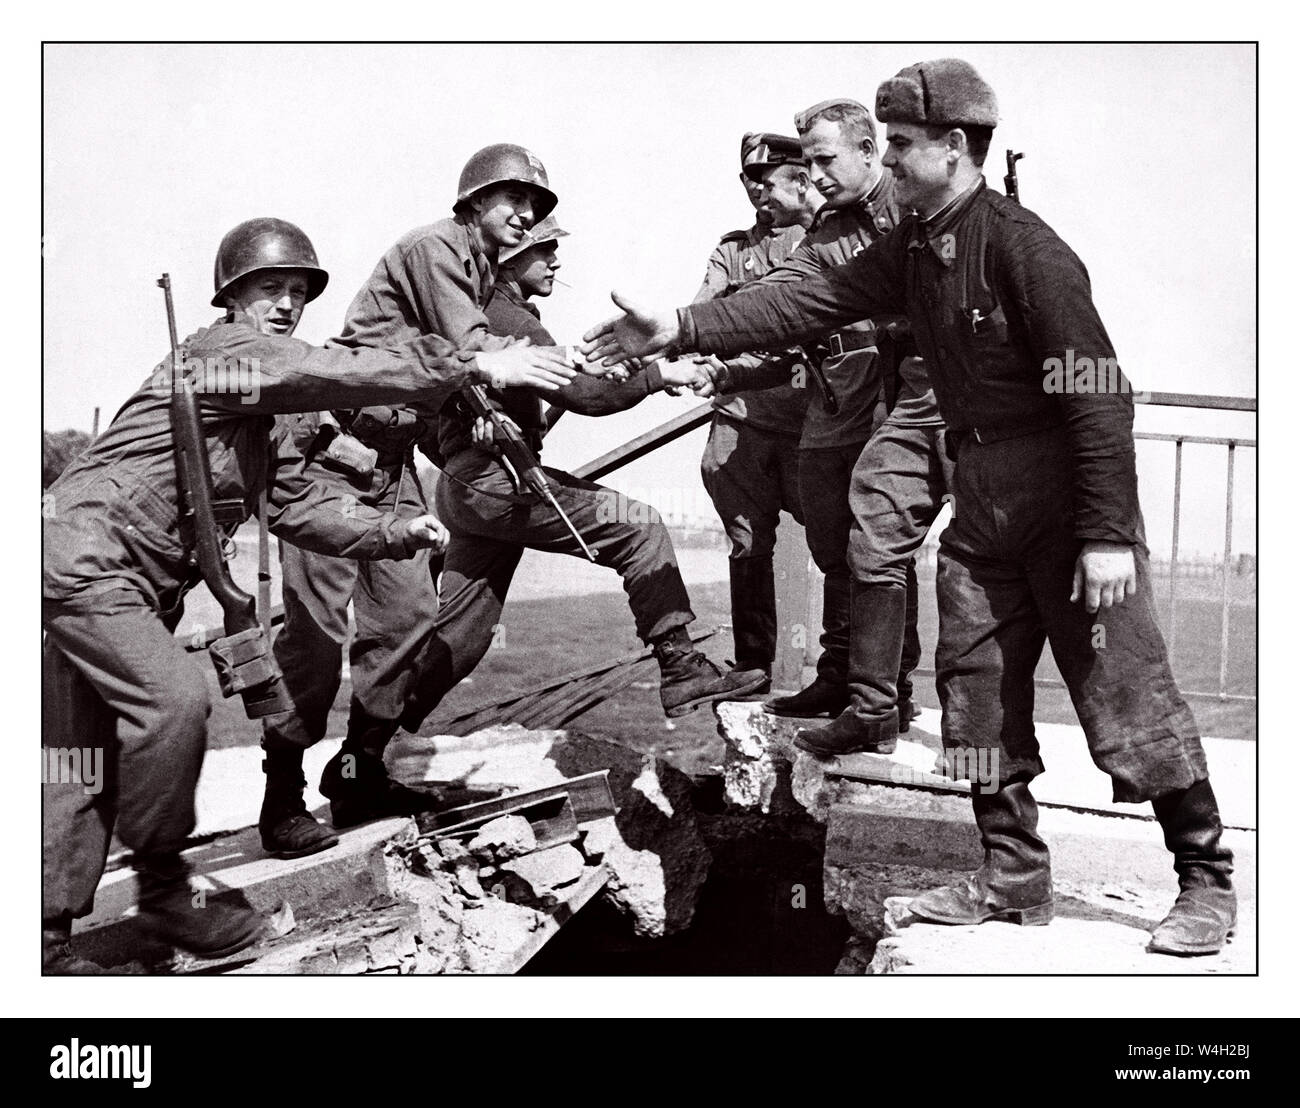 TORGAU East meets West WW2 image of U.S. and Soviet troops meeting on the bridge over the Elbe River at Torgau on April 26, 1945.  The famous “handshake of Torgau” photograph that signified east meeting west near the end of World War II  U S First Army crossing damaged bridge over the River Elbe Torgau Saxony Germany U.S. Army photo Stock Photo